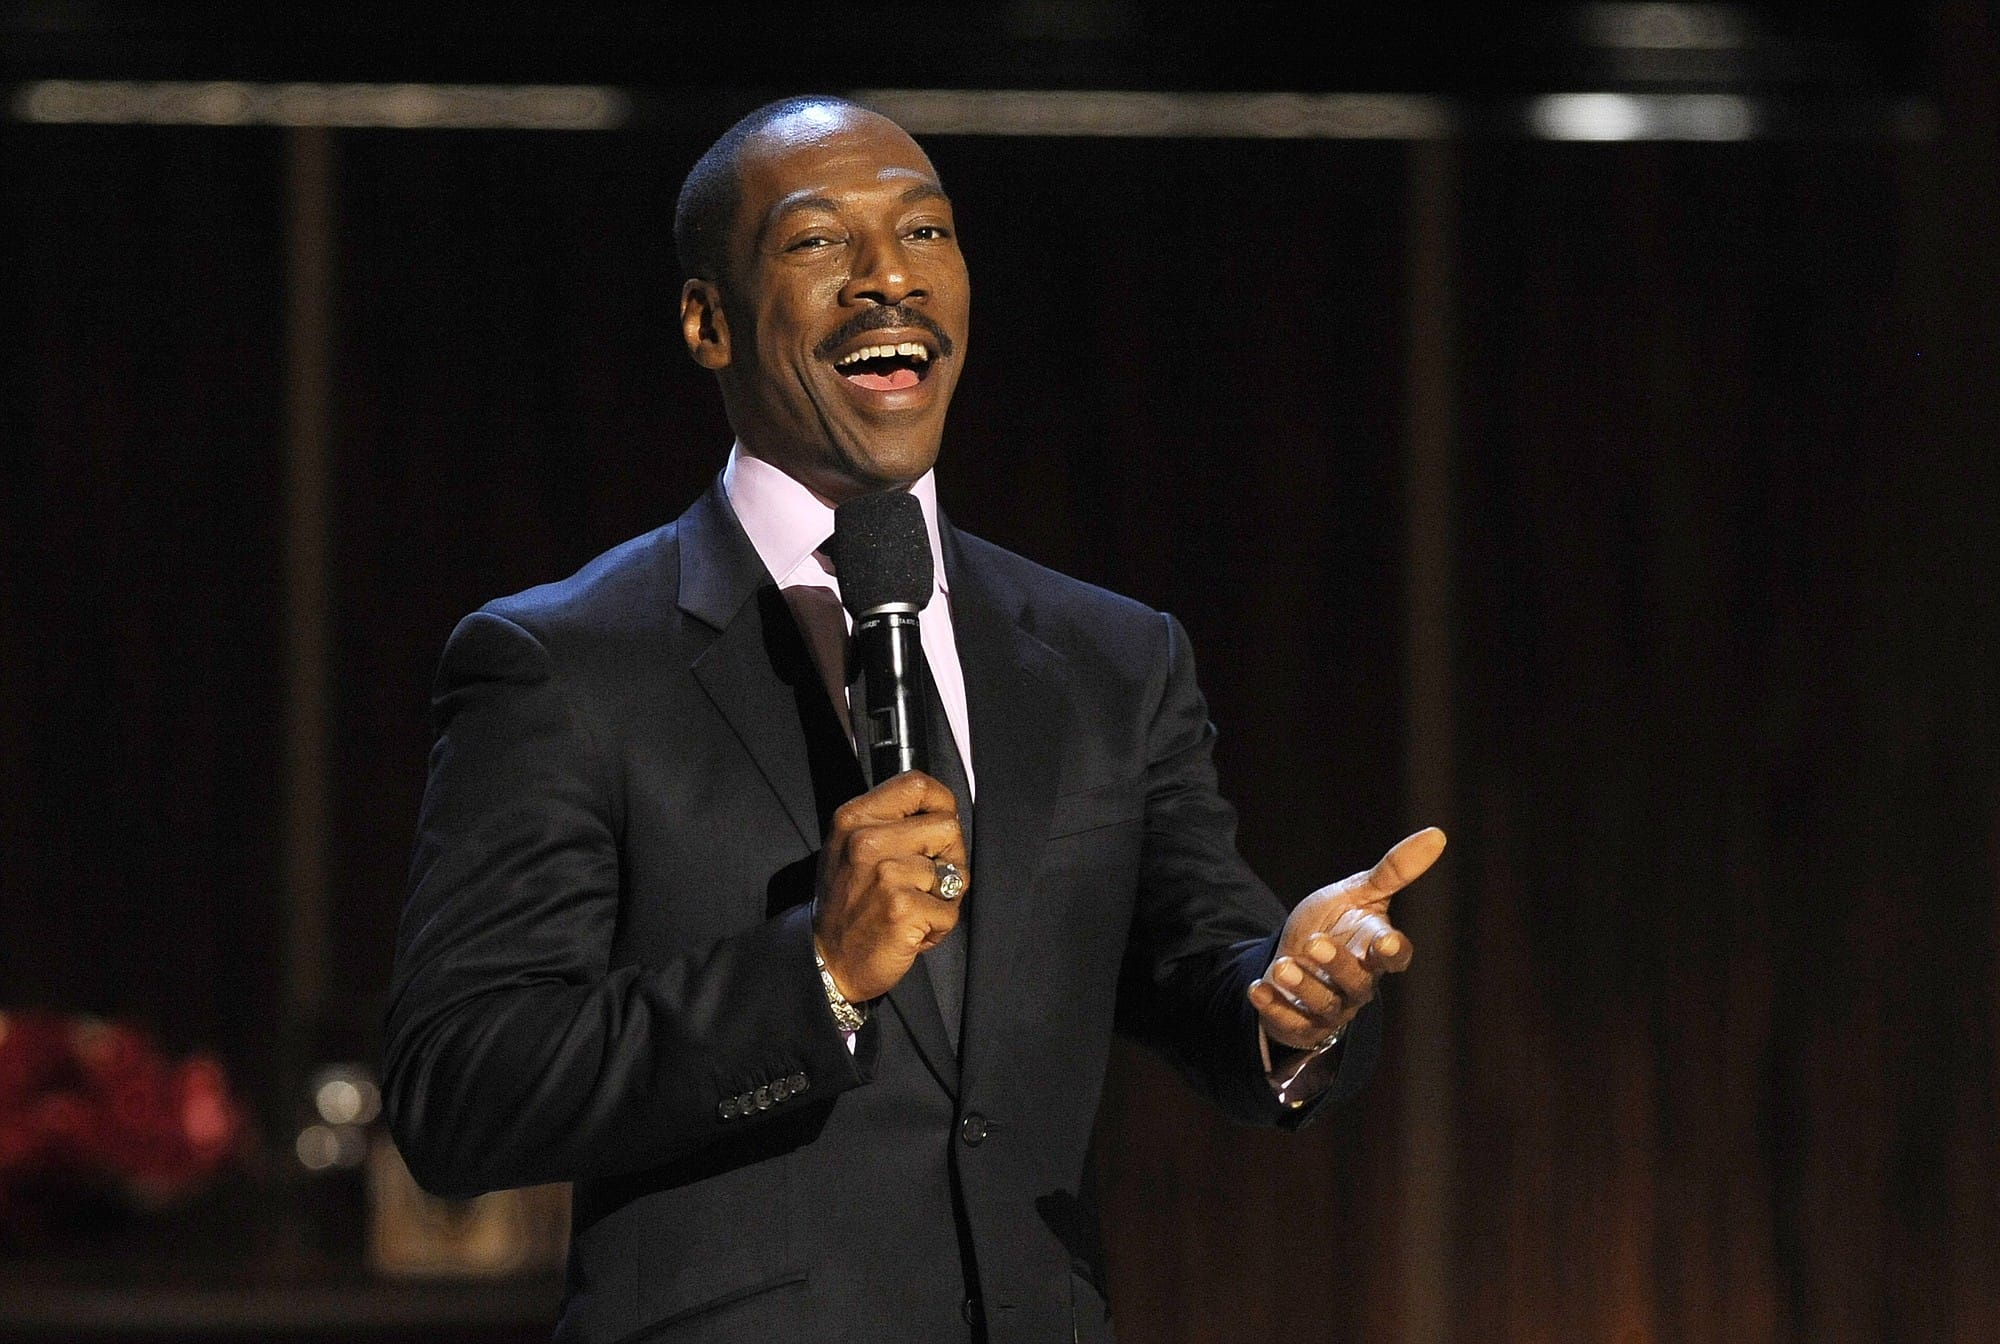 Eddie Murphy speaks at the close of &quot;Eddie Murphy: One Night Only,&quot; a celebration of Murphy's career at the Saban Theater in Beverly Hills, Calif.